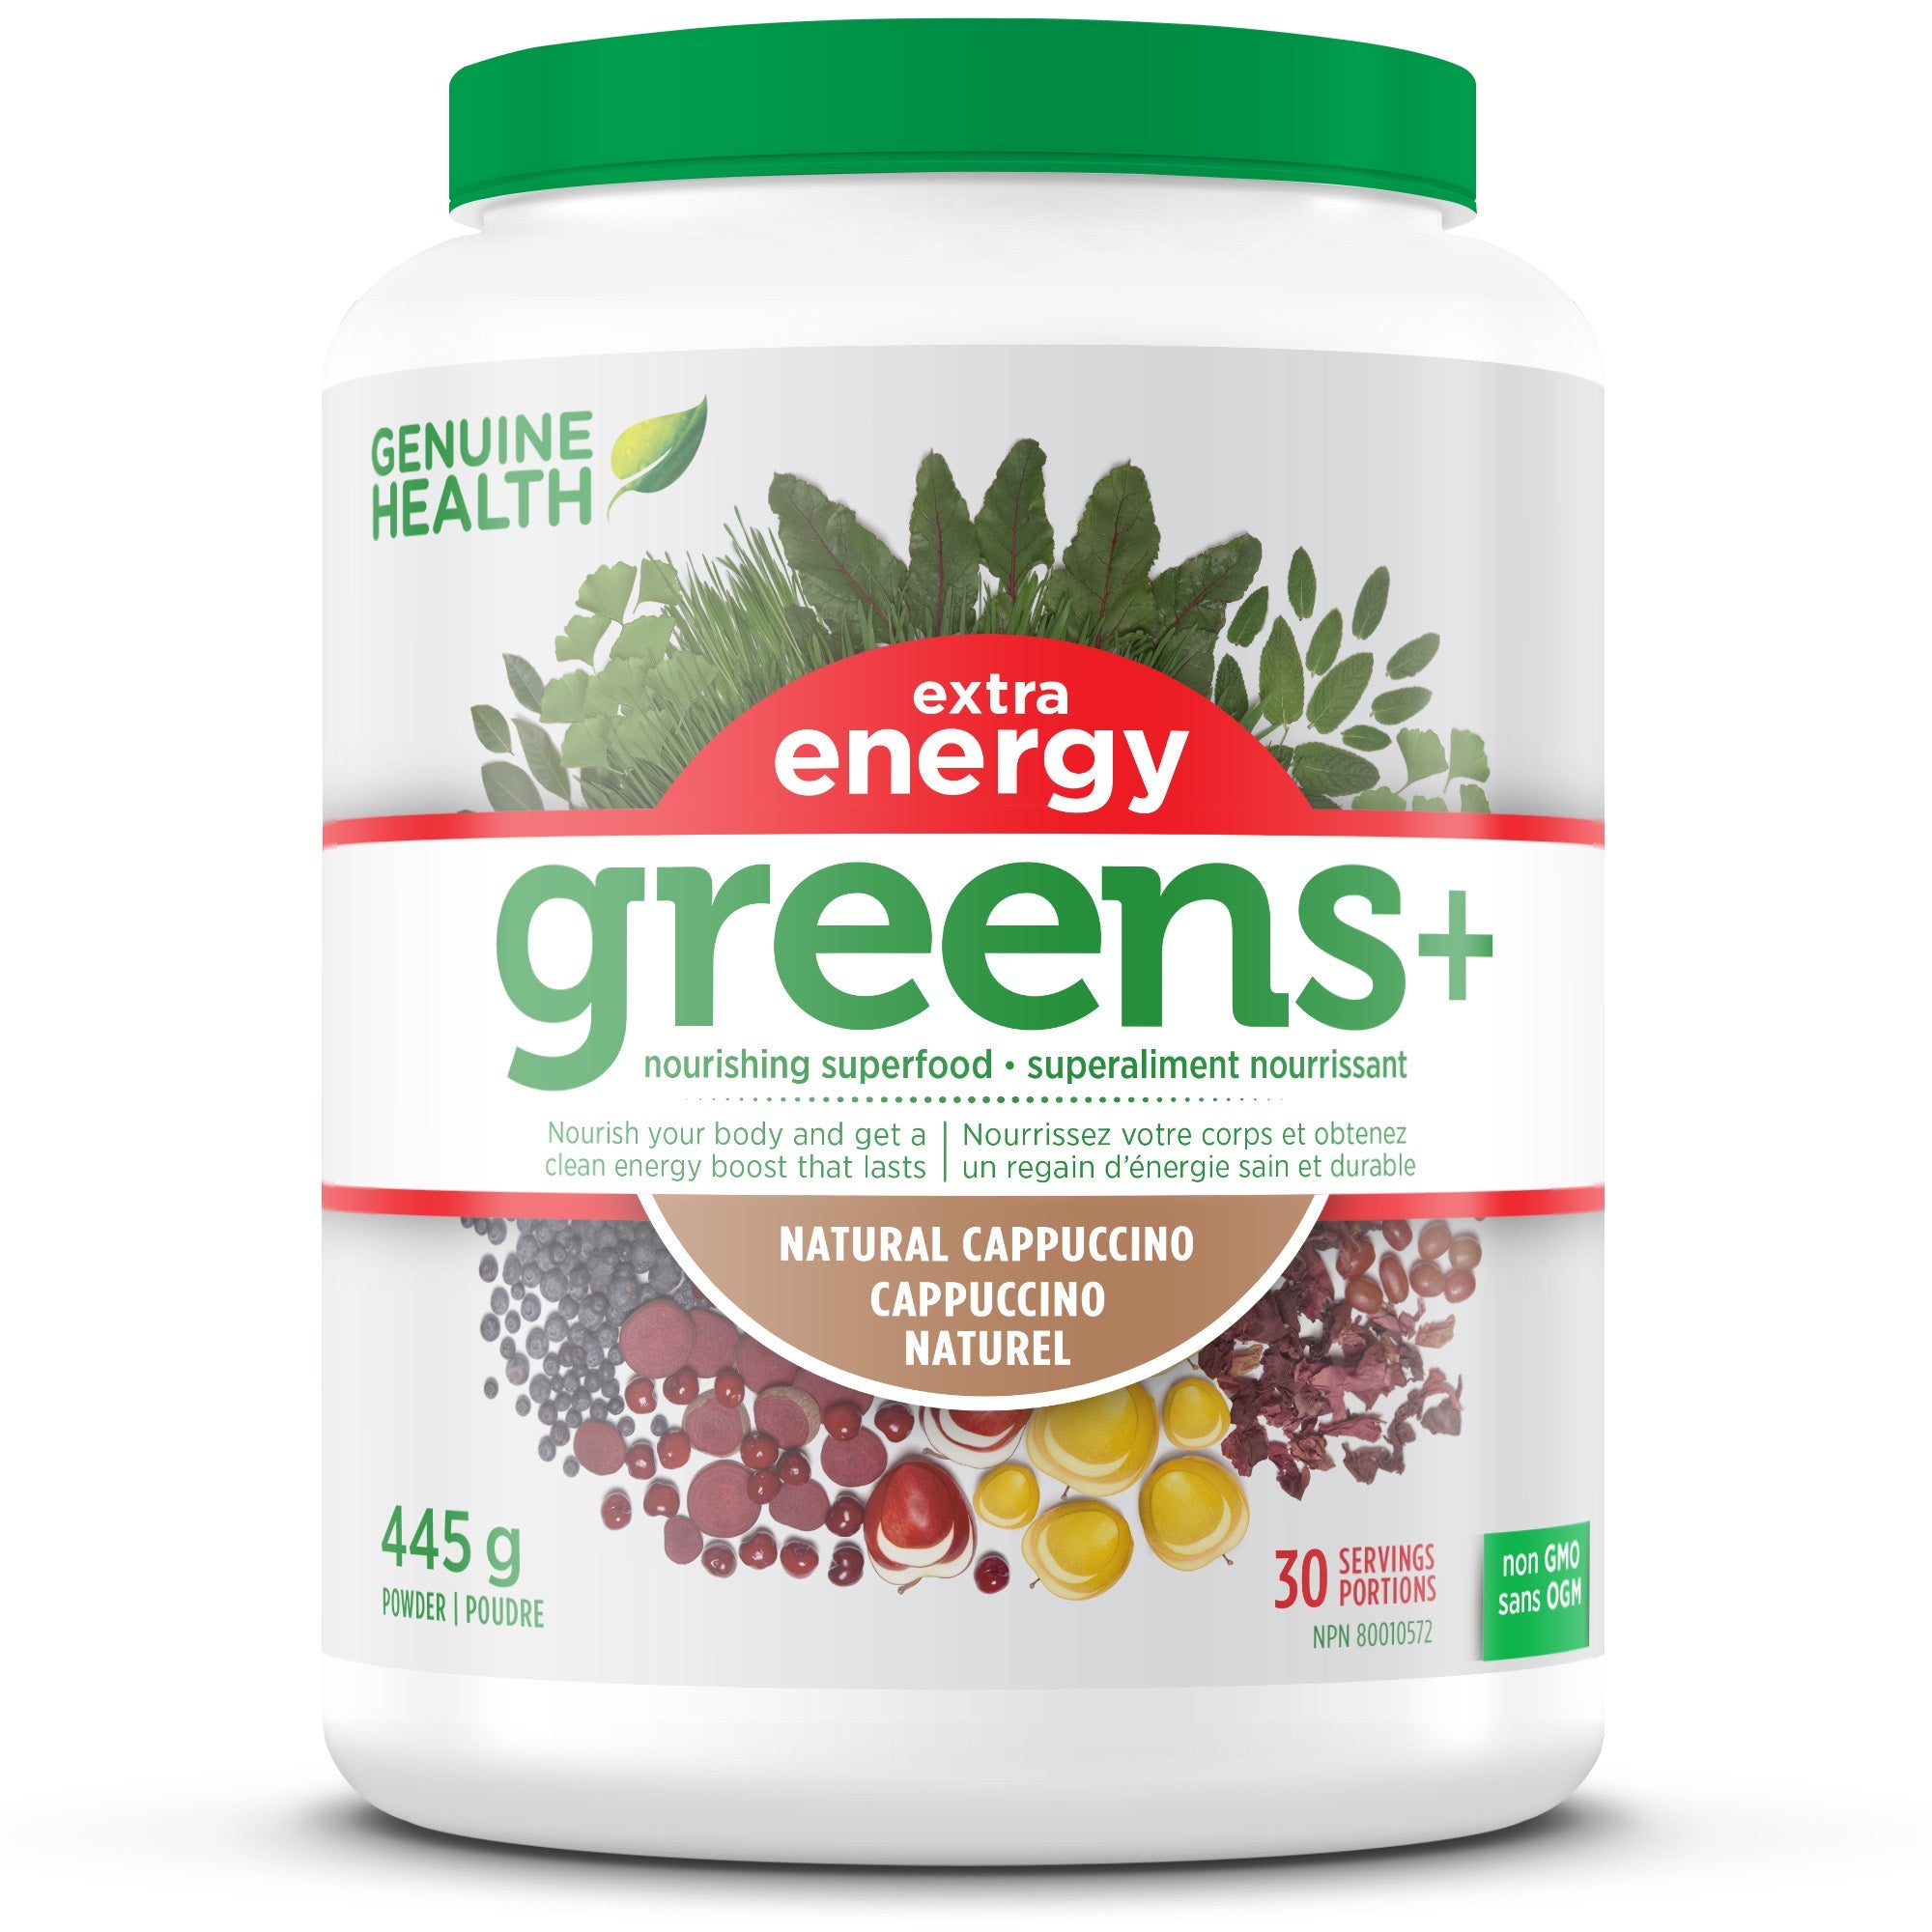 Greens+ extra energy (cappuccino) 445g